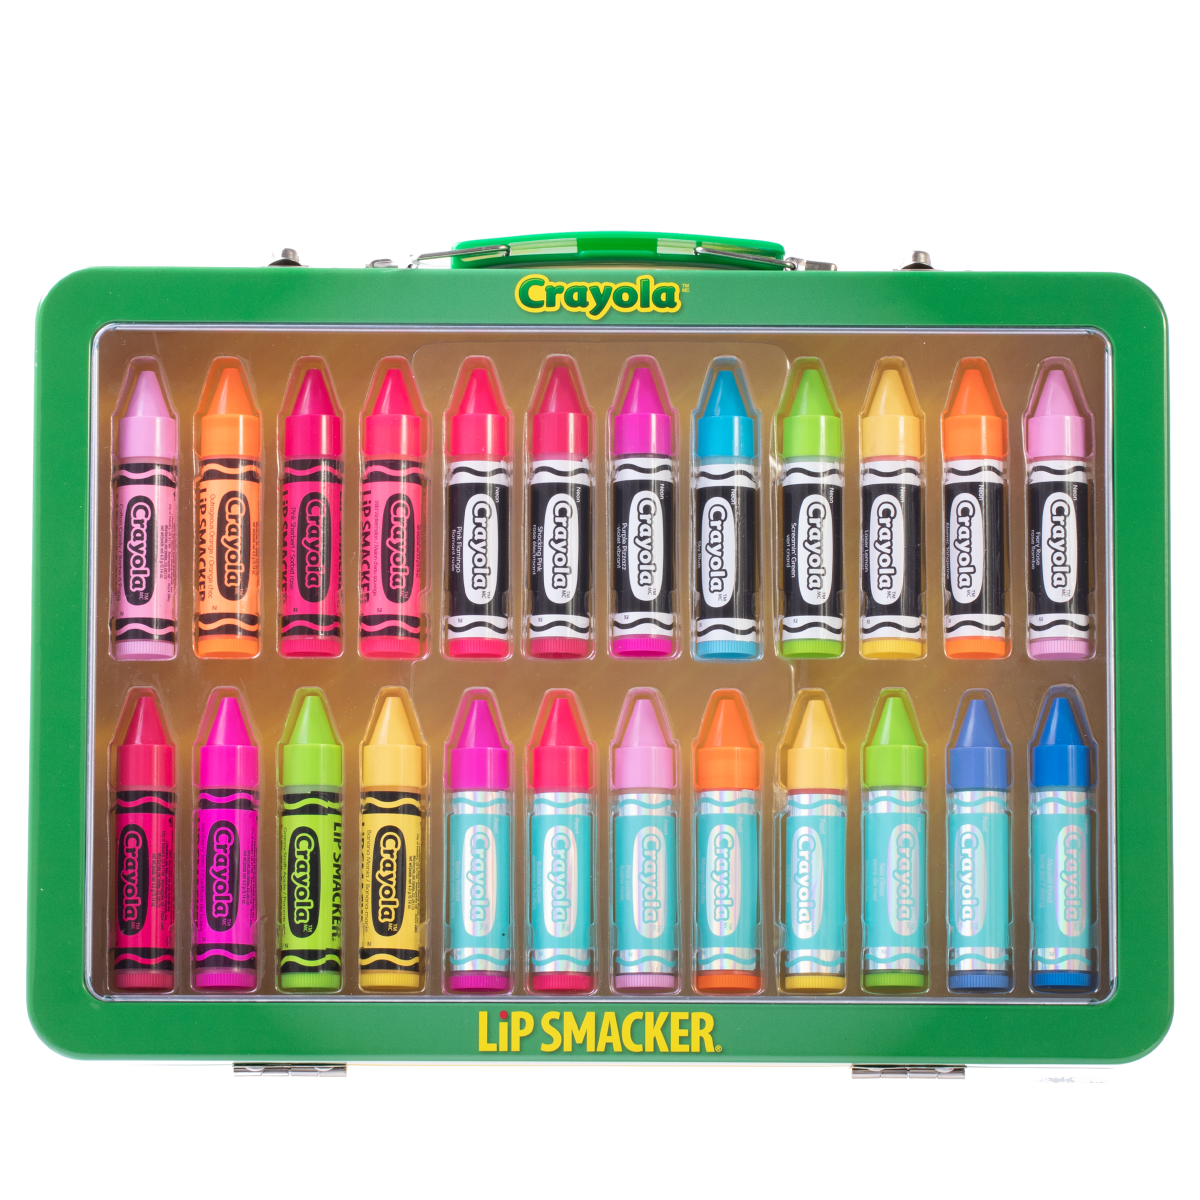 Crayola Crayon Set with Coloring Pages, Gift for Kids, 208 Crayons with  Repeats of Favorite Colors